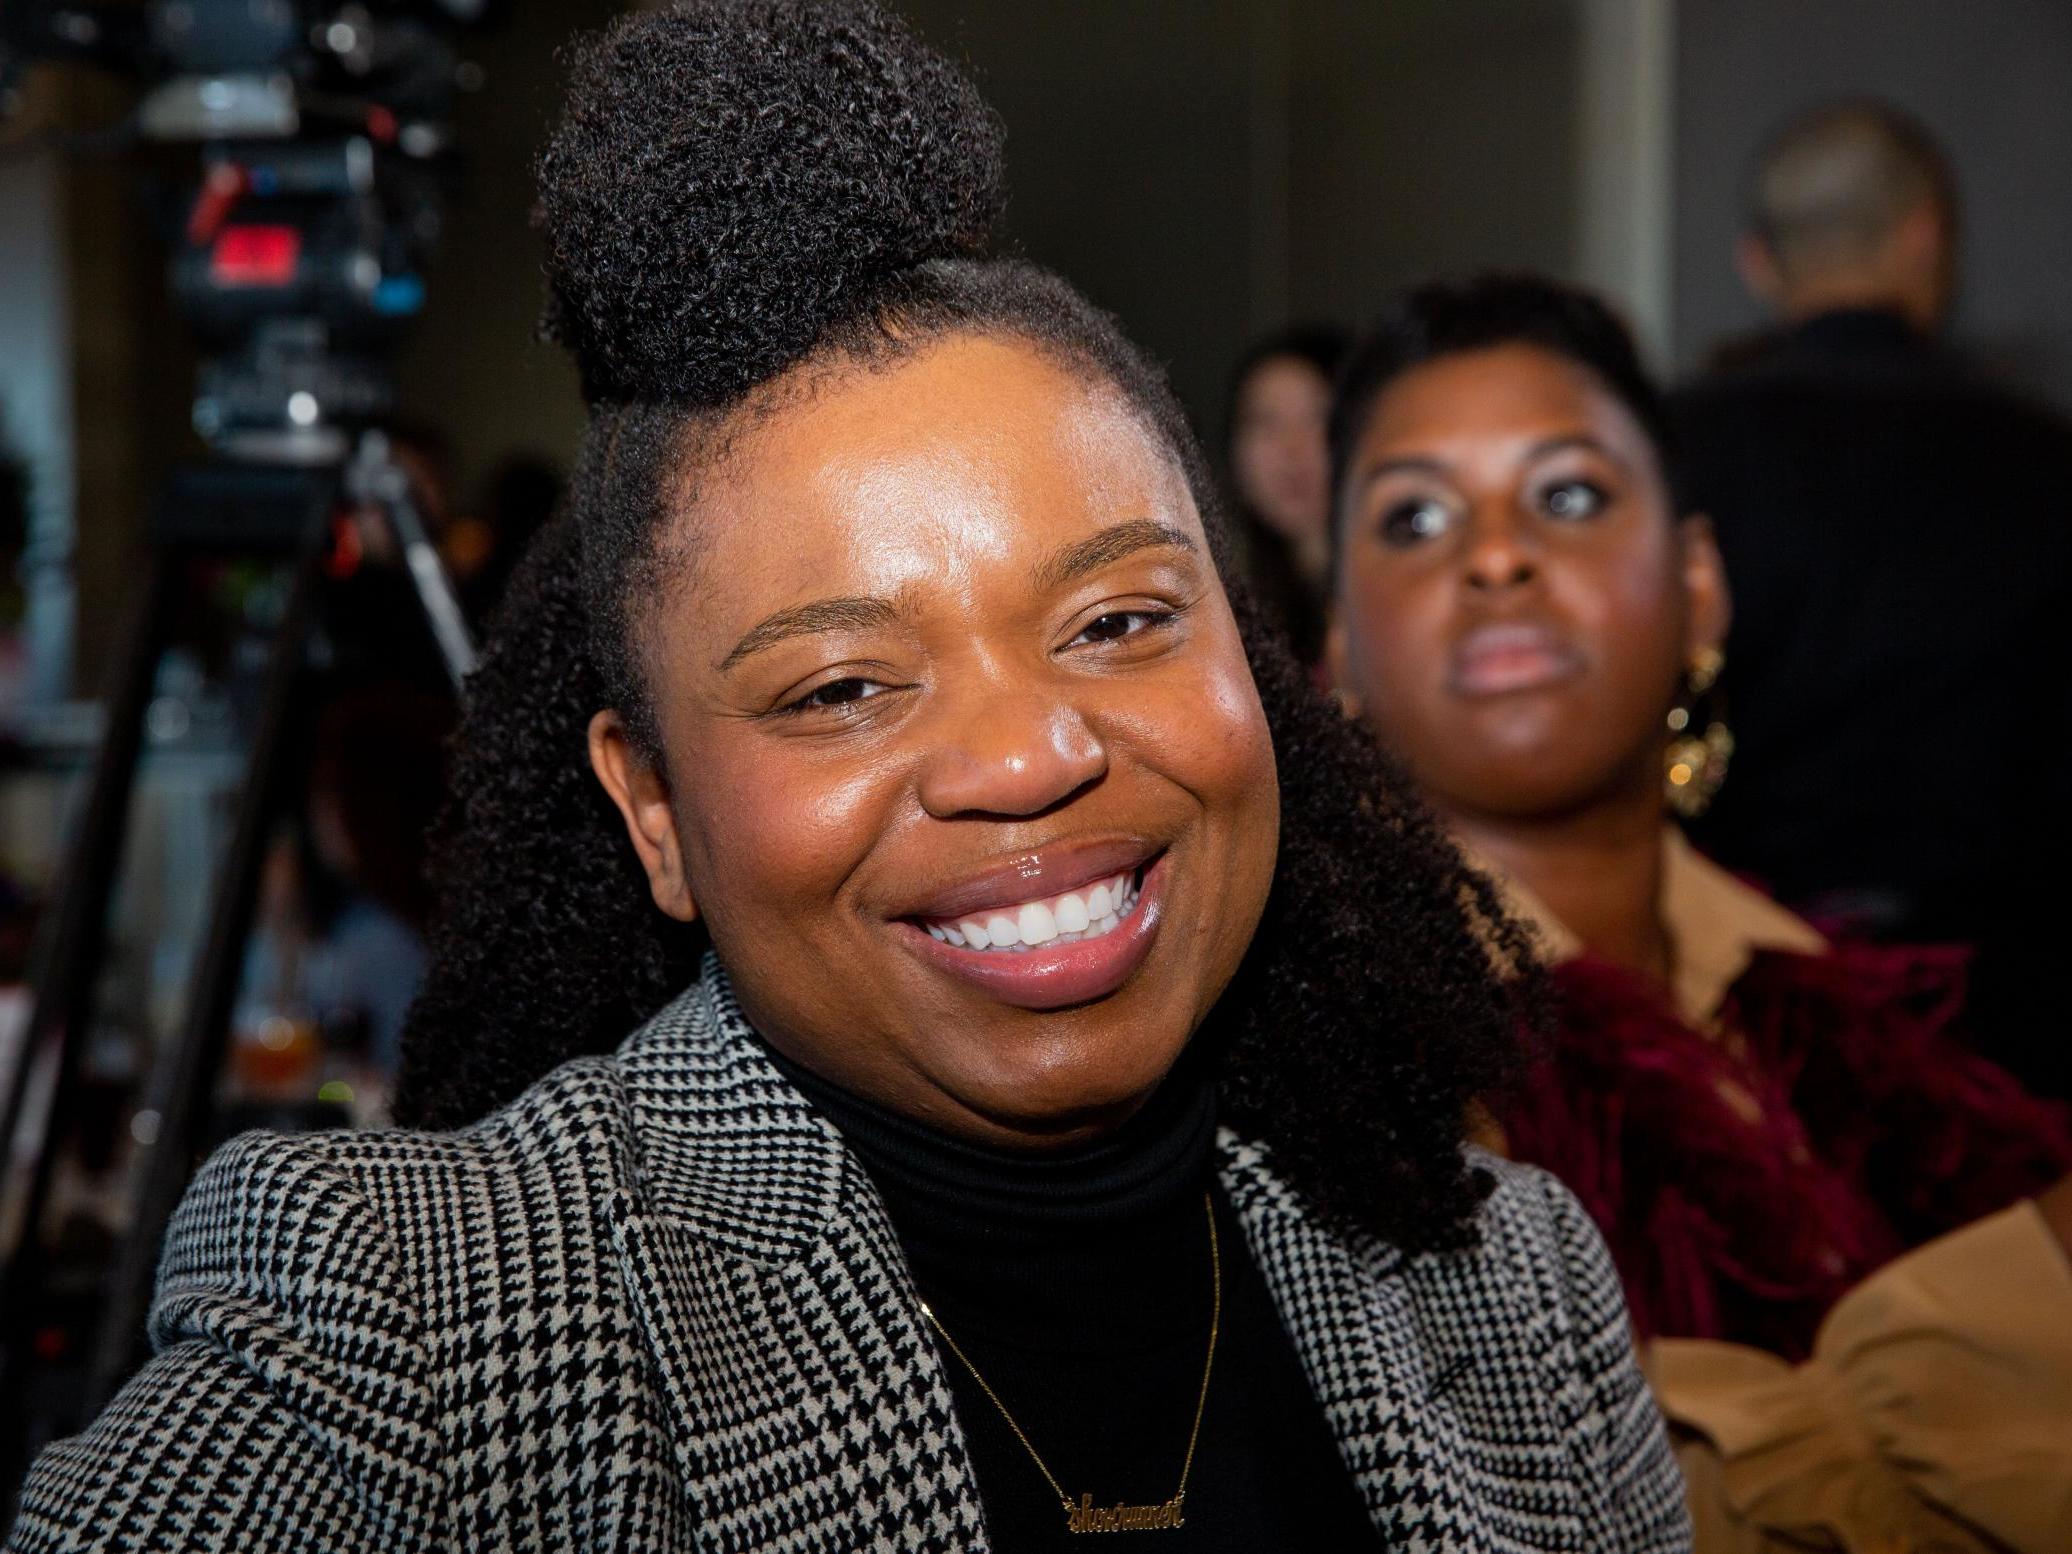 Katori Hall at Rolling Stone’s Women Shaping the Future event in March 2020